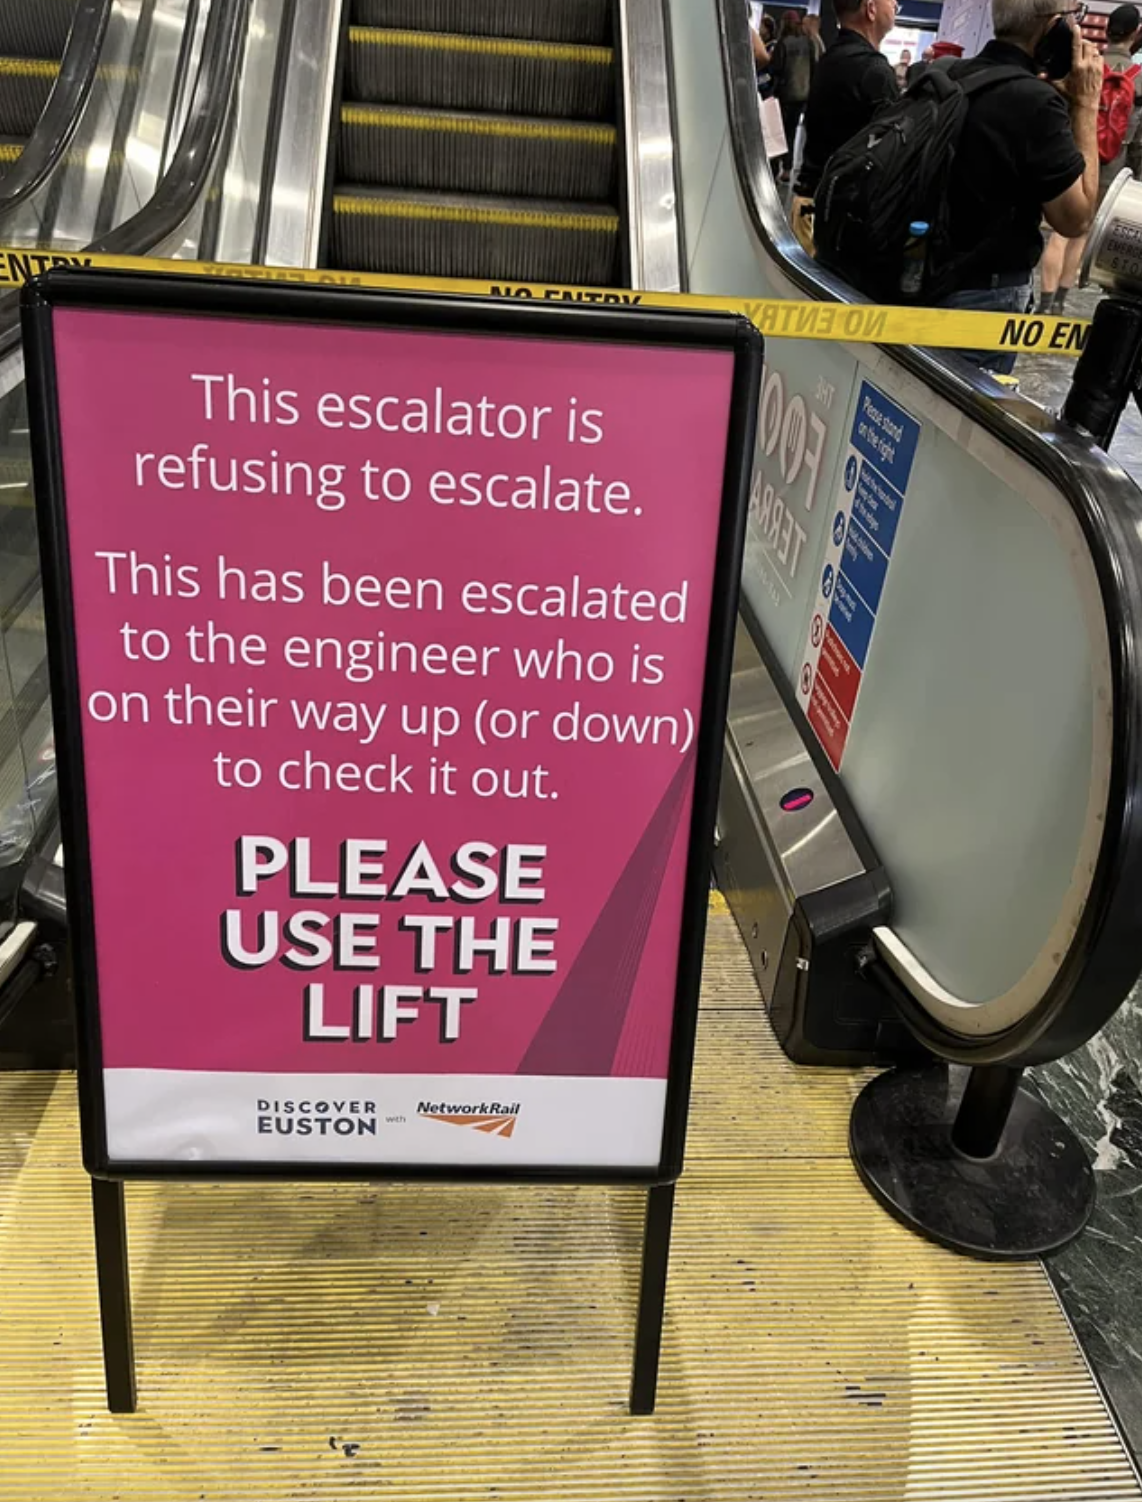 A sign next to an escalator says &quot;this escalator is refusing to escalate. This has been escalated to the engineer who is on their way up (or down) to check it out&quot;